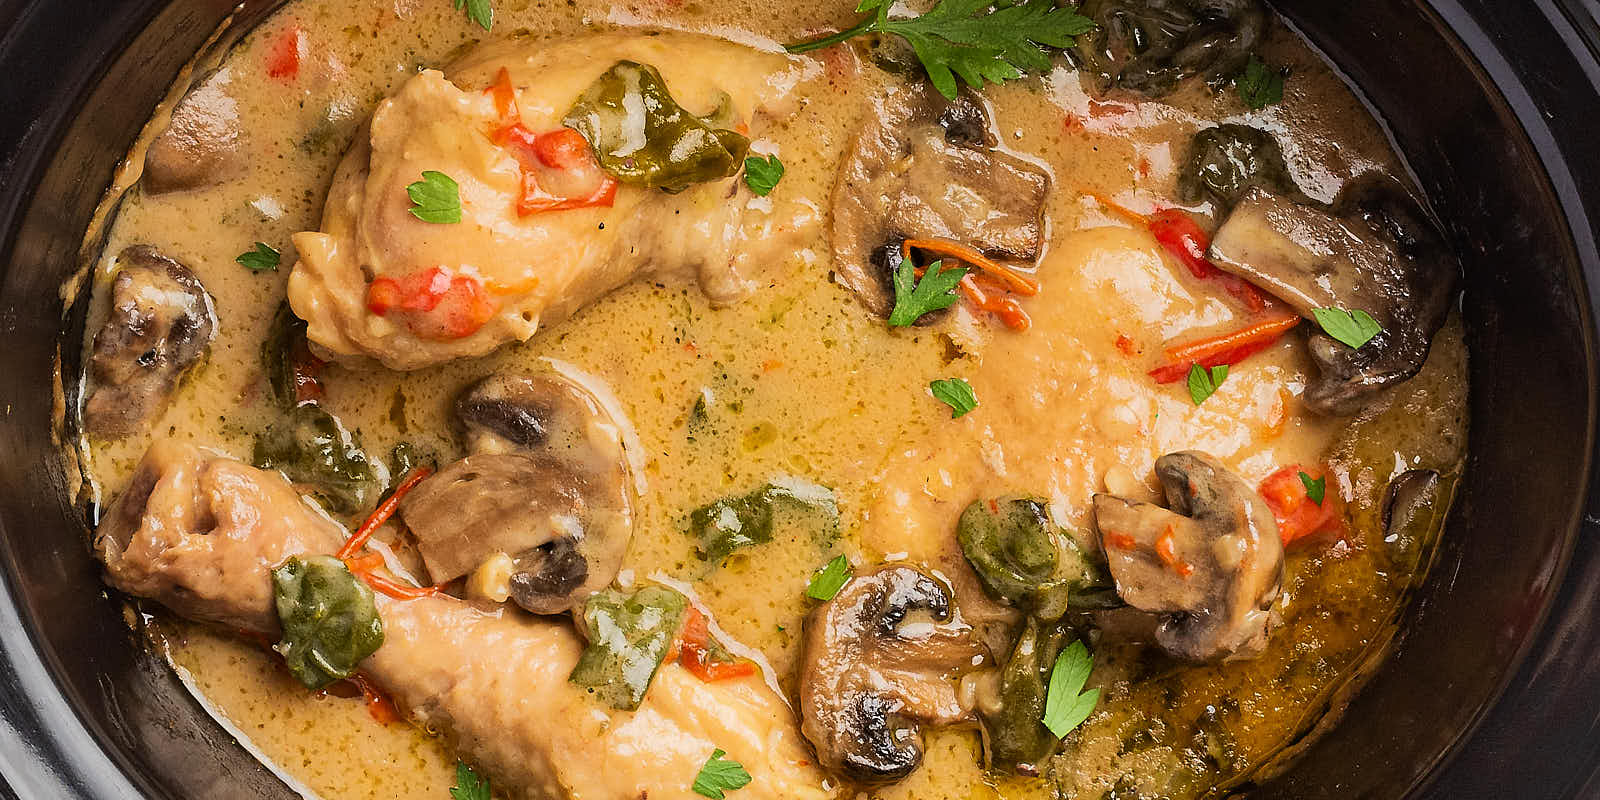 Crock Pot Creamy Chicken and Mushrooms recipe by Cheerful Cook.